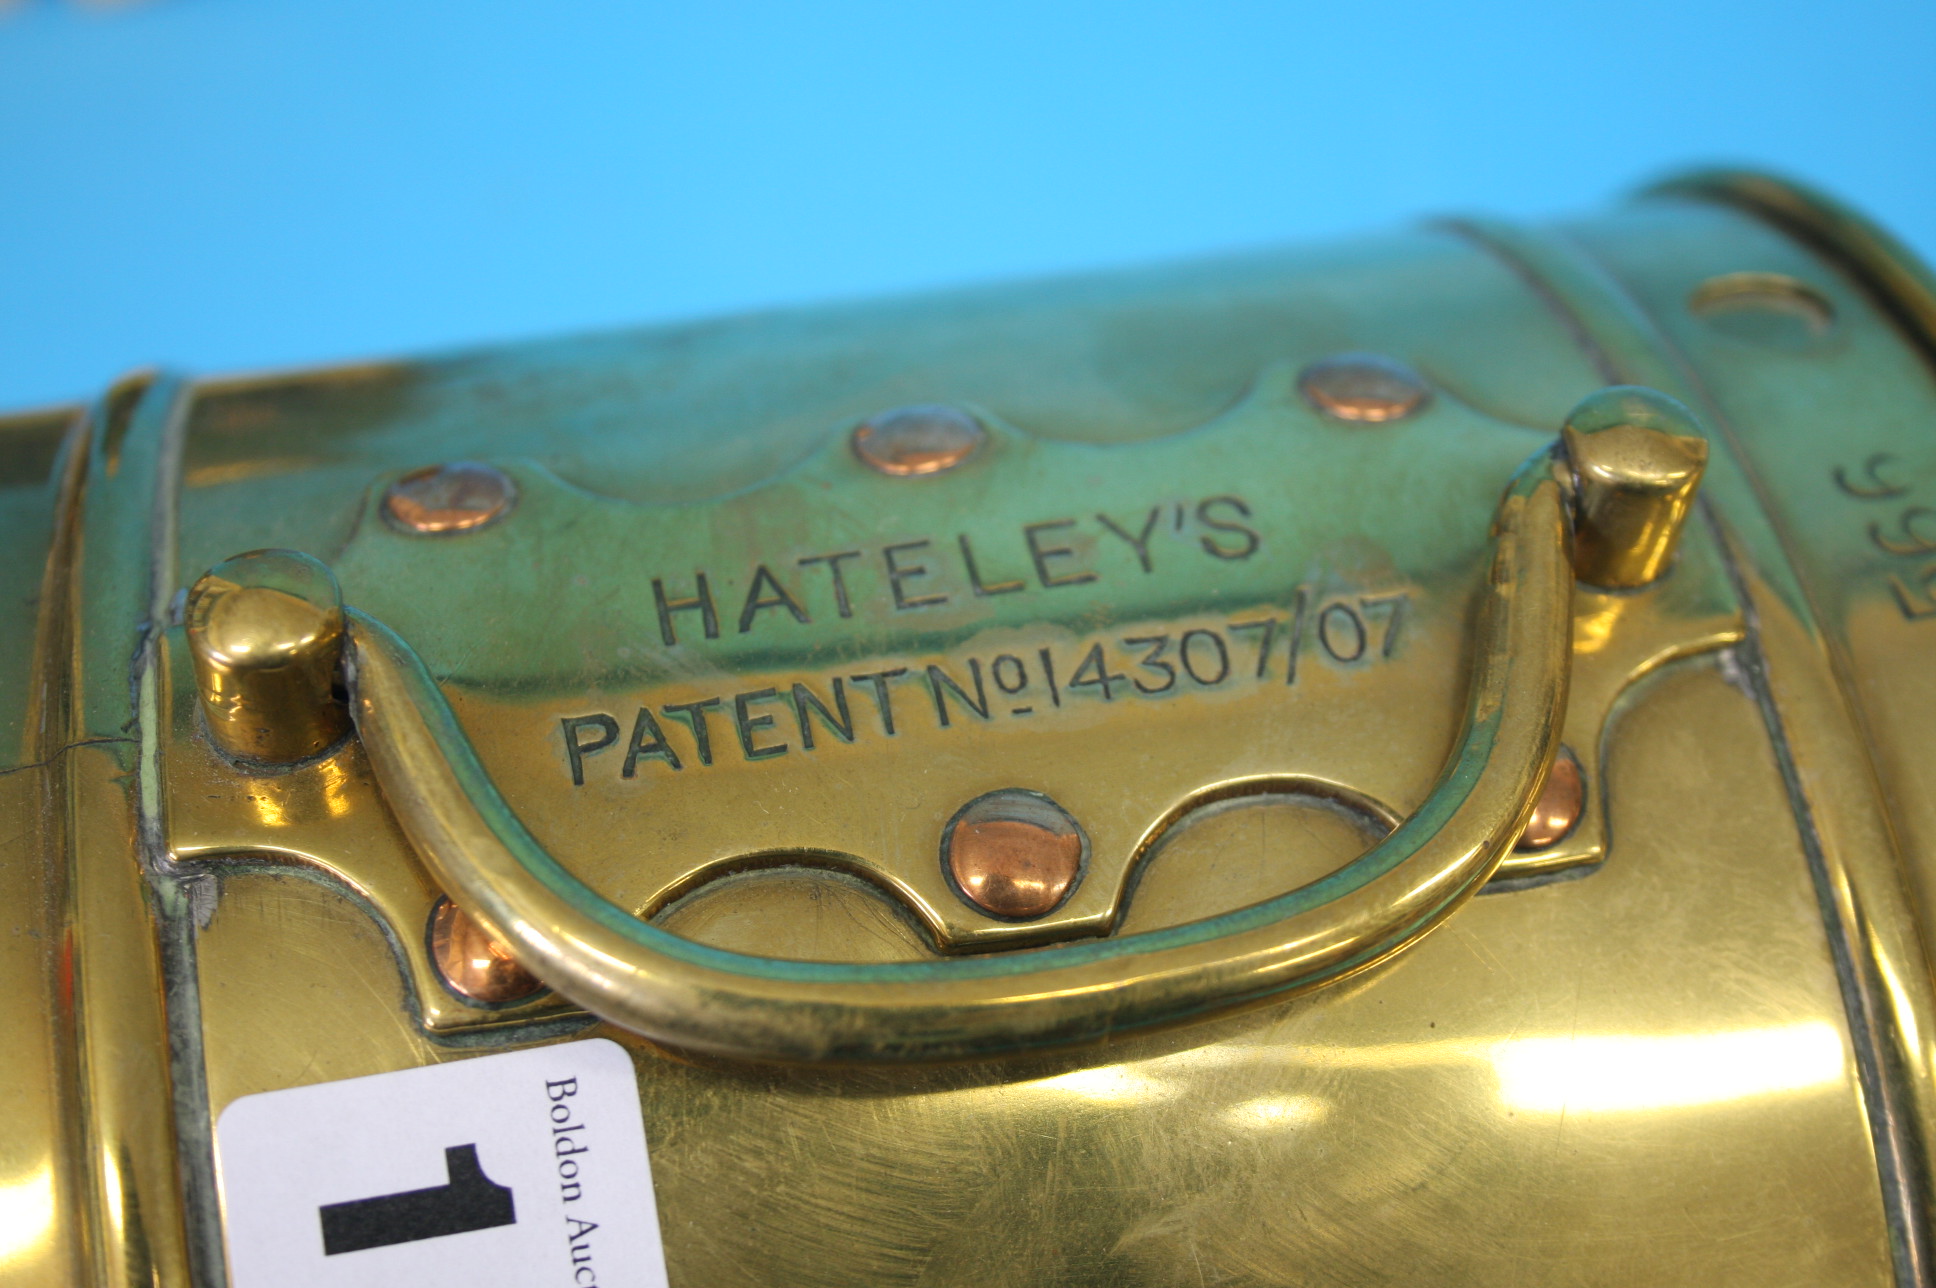 A Hateley's "Turners Patent" "The Homing Pigeon Clock" in a brass case, silvered dial; and a pair of - Image 3 of 3